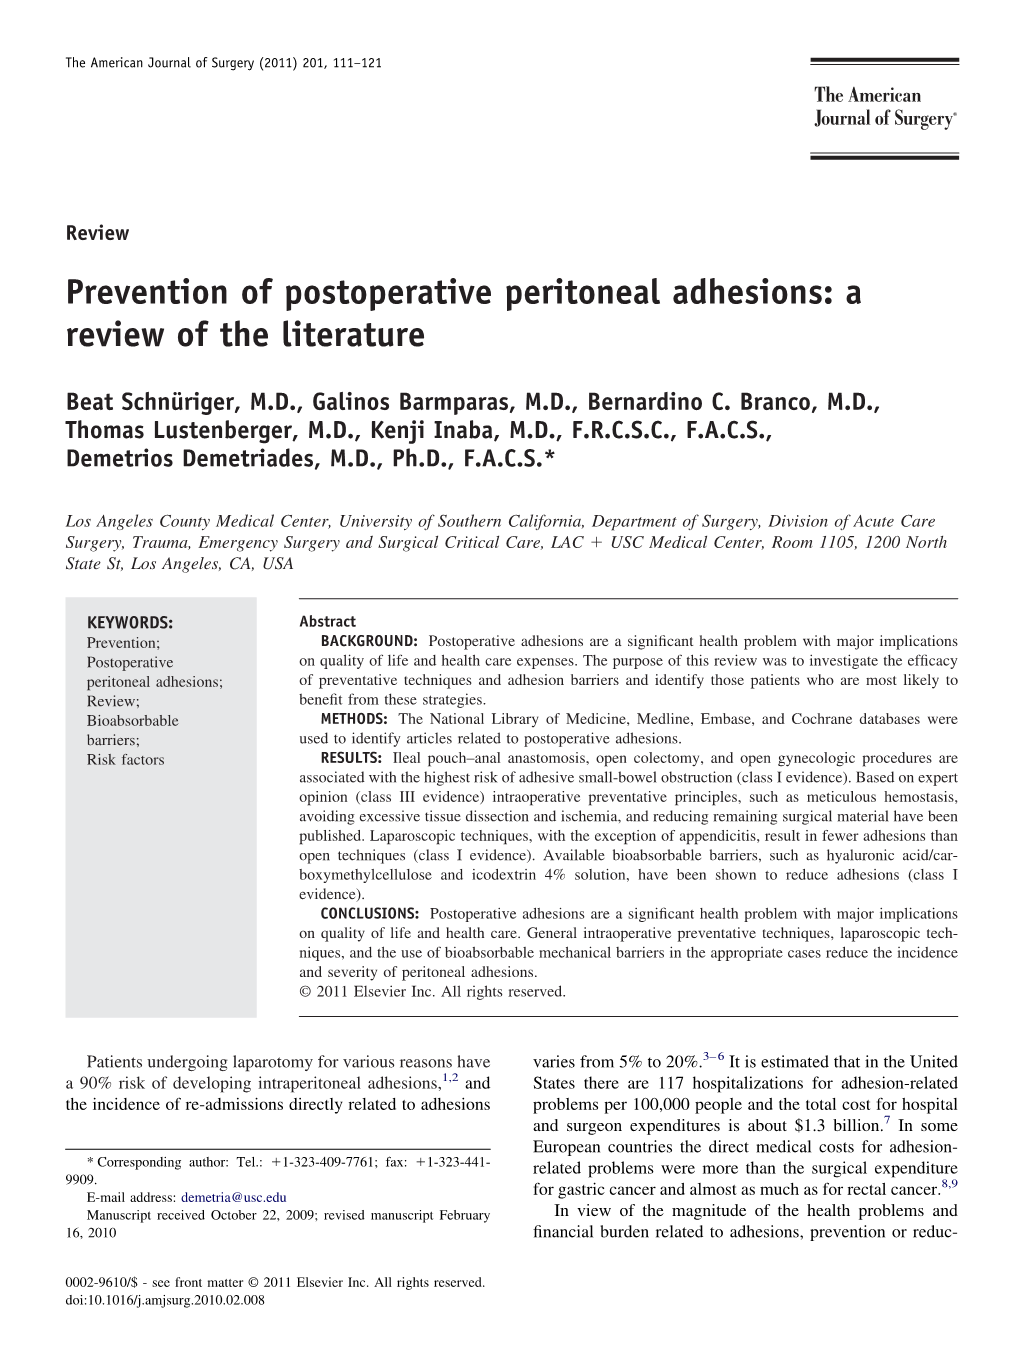 Prevention of Postoperative Peritoneal Adhesions: a Review of the Literature